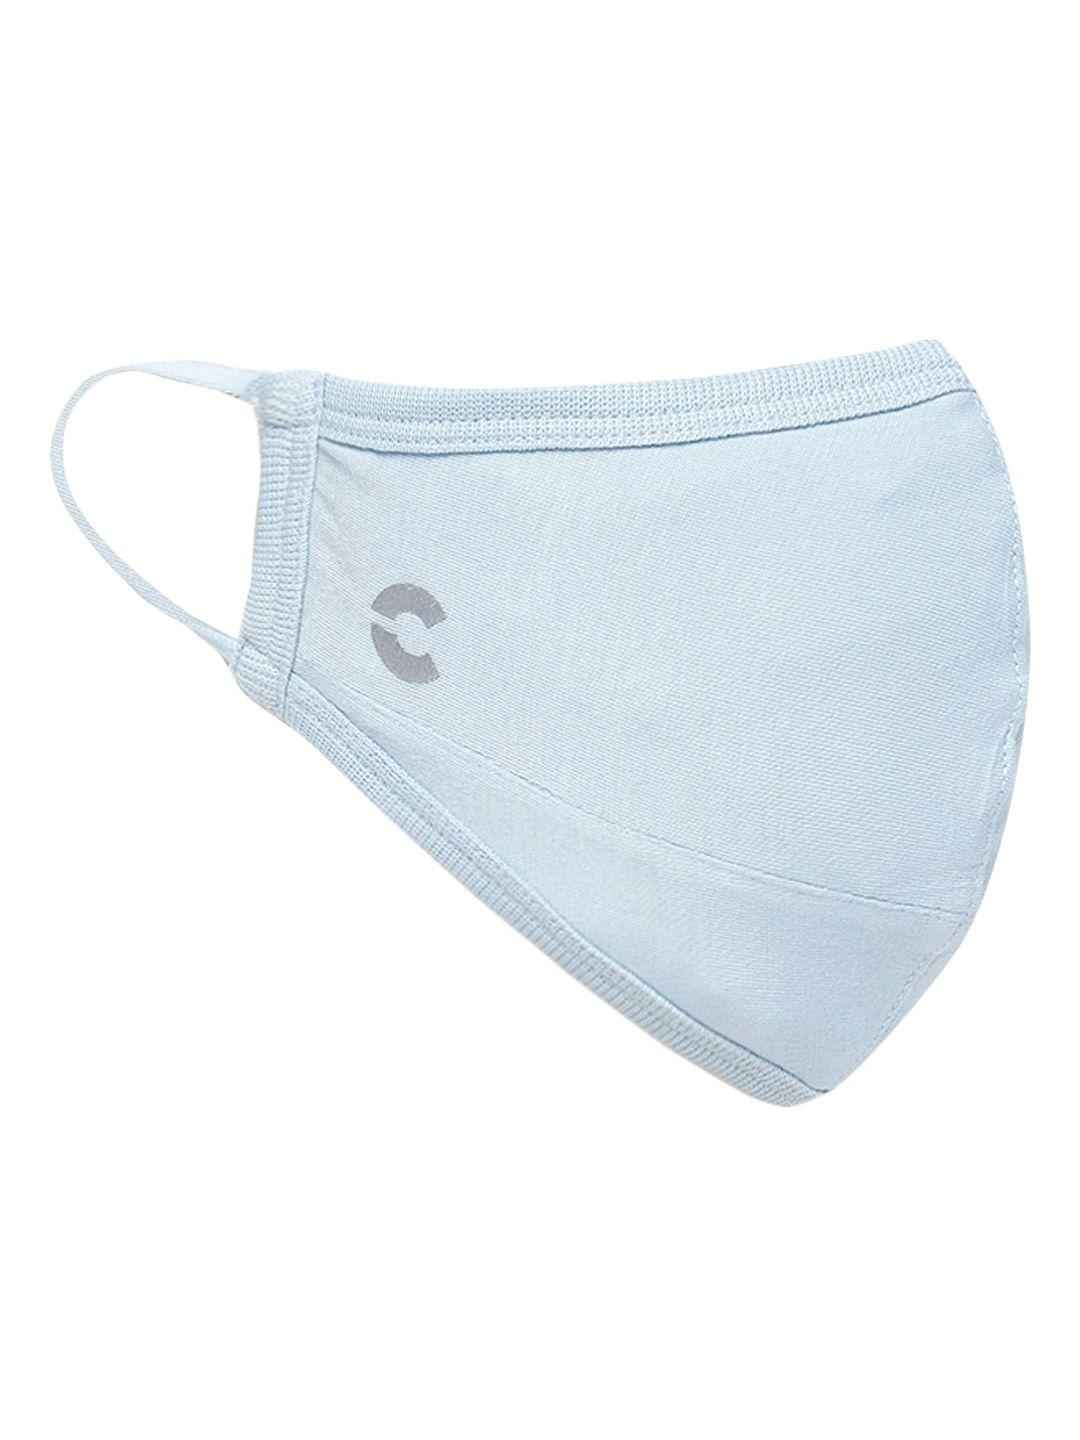 freecultr blue solid anti microbial bamboo cloth mask